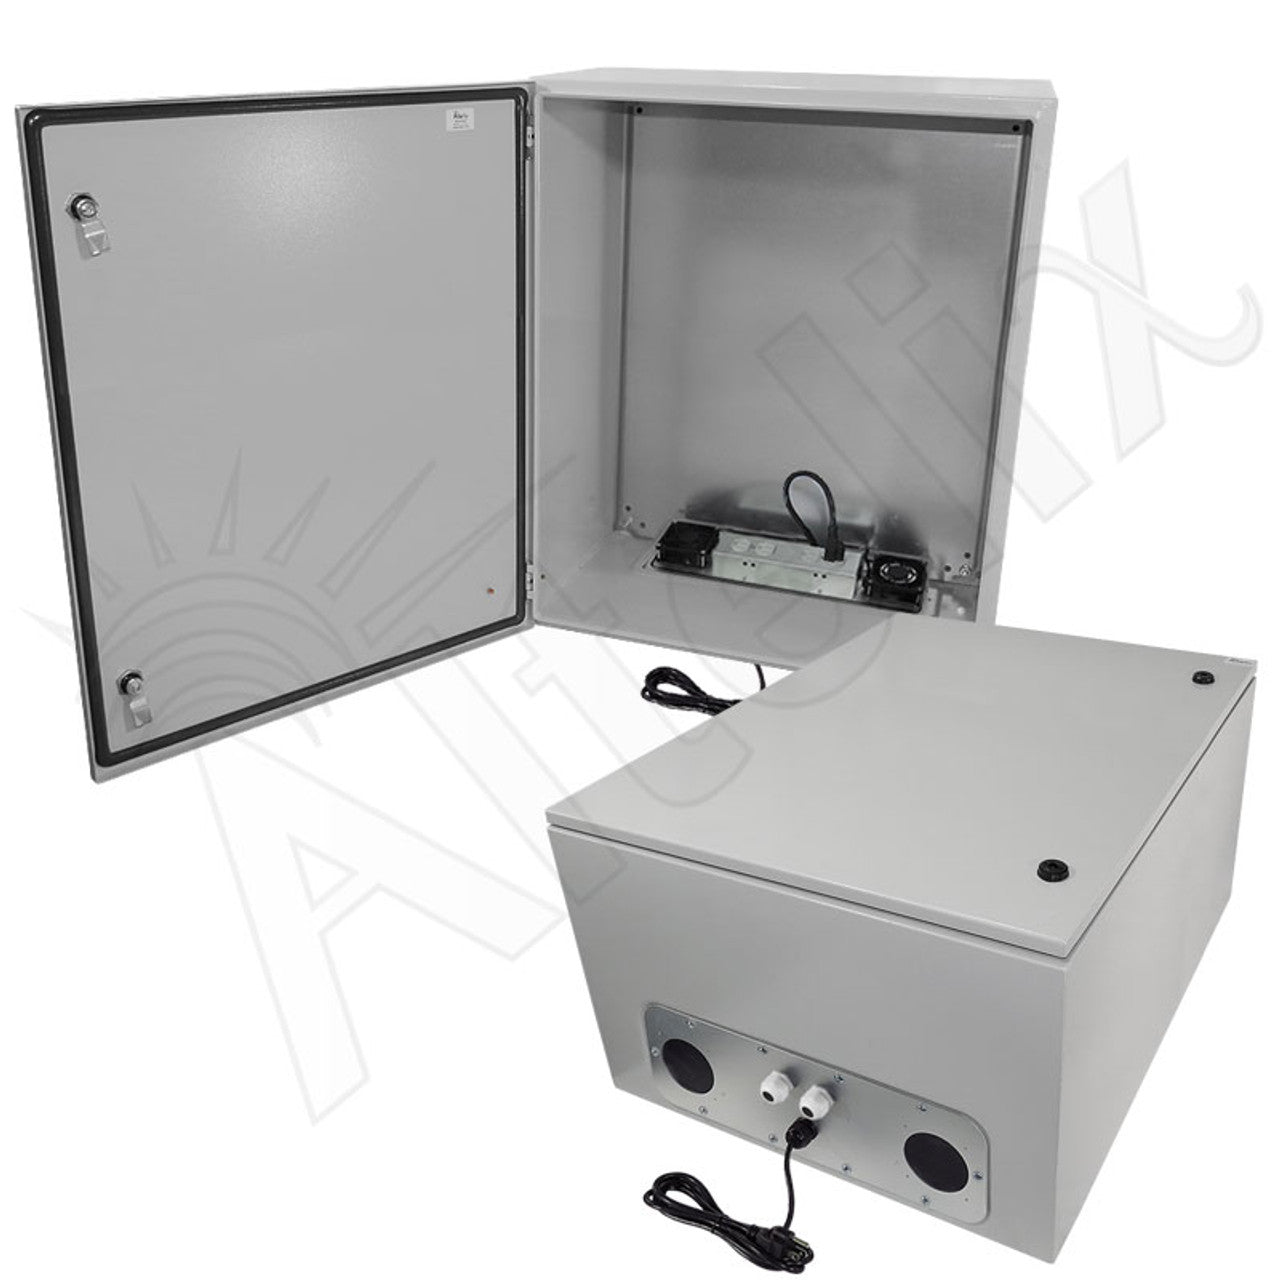 Altelix Steel Heated Weatherproof NEMA Enclosure with Dual Cooling Fans, 200W Heater, 120 VAC Outlets and Power Cord-9